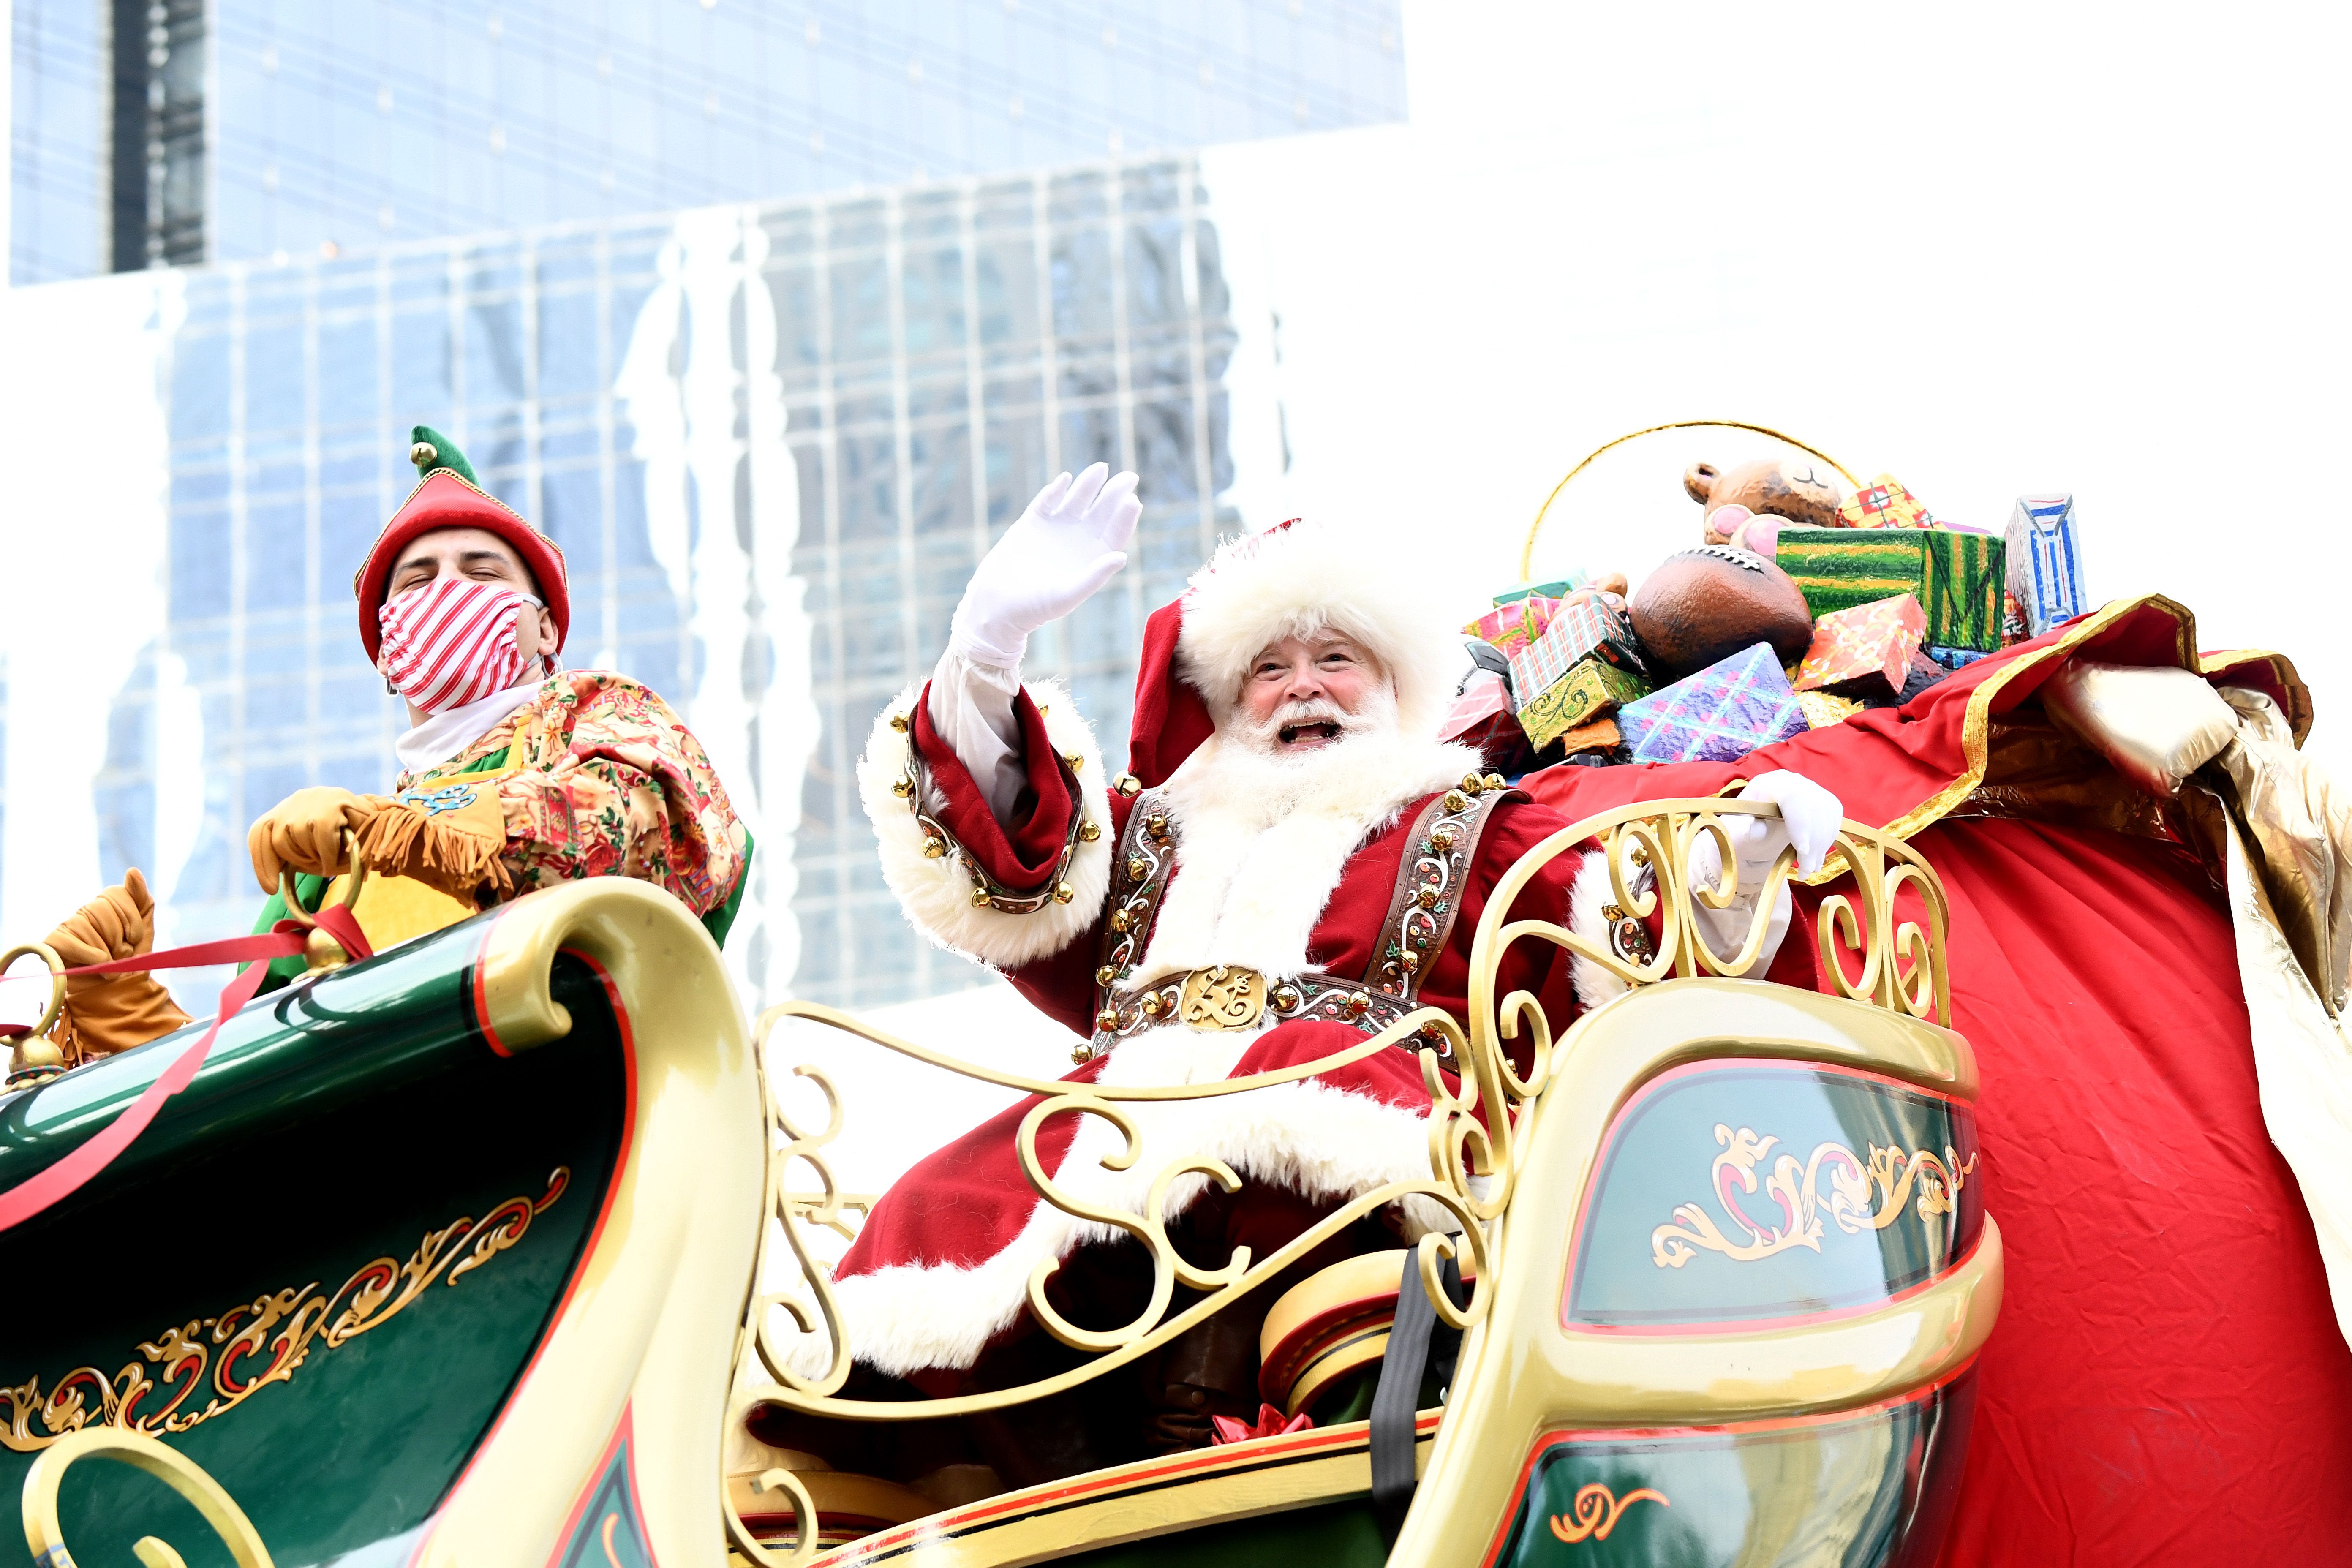 : Santa Claus attends the 95th Macy's Thanksgiving Day Parade